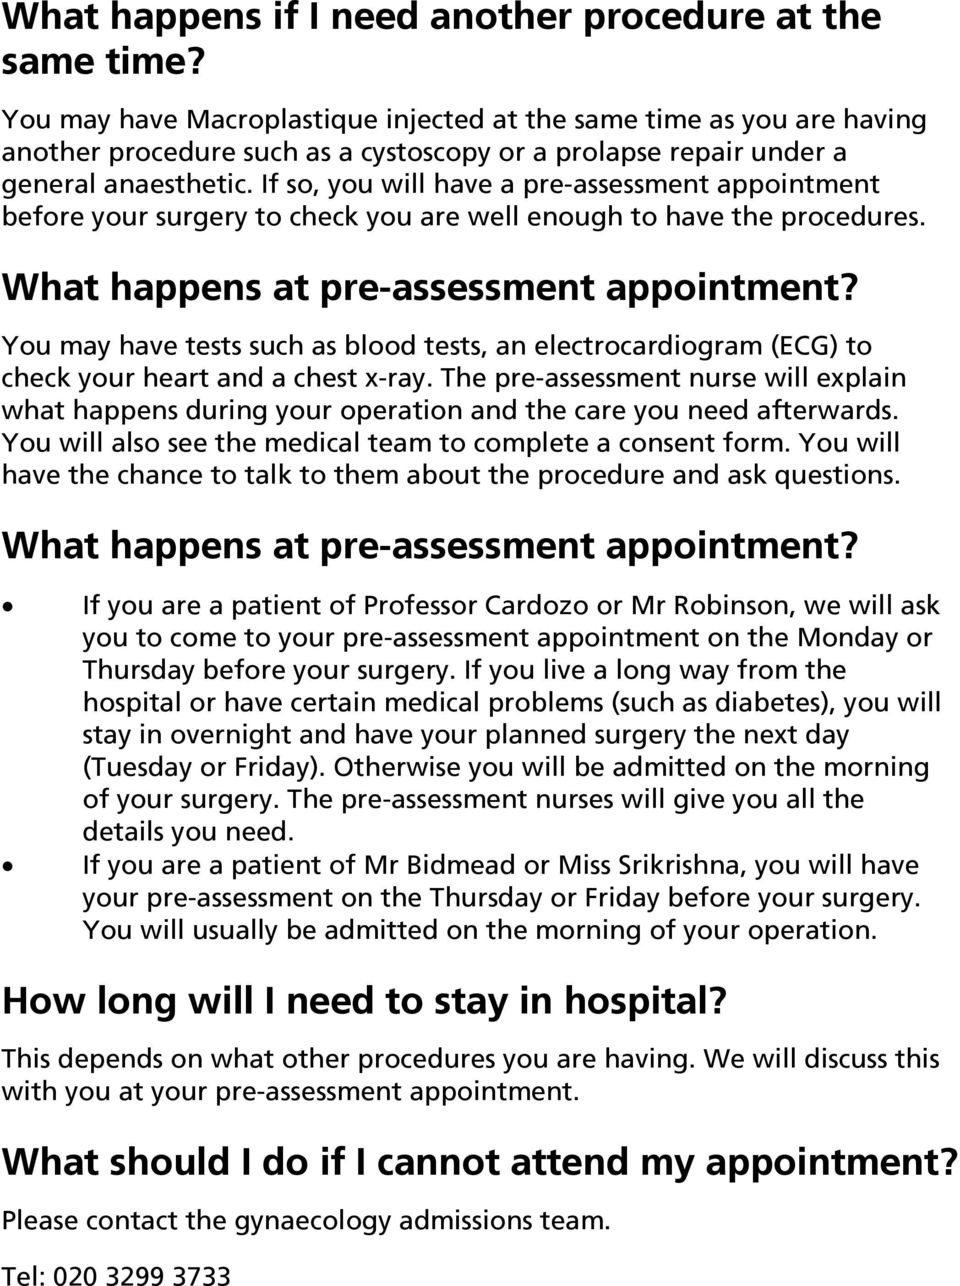 If so, you will have a pre-assessment appointment before your surgery to check you are well enough to have the procedures. What happens at pre-assessment appointment?